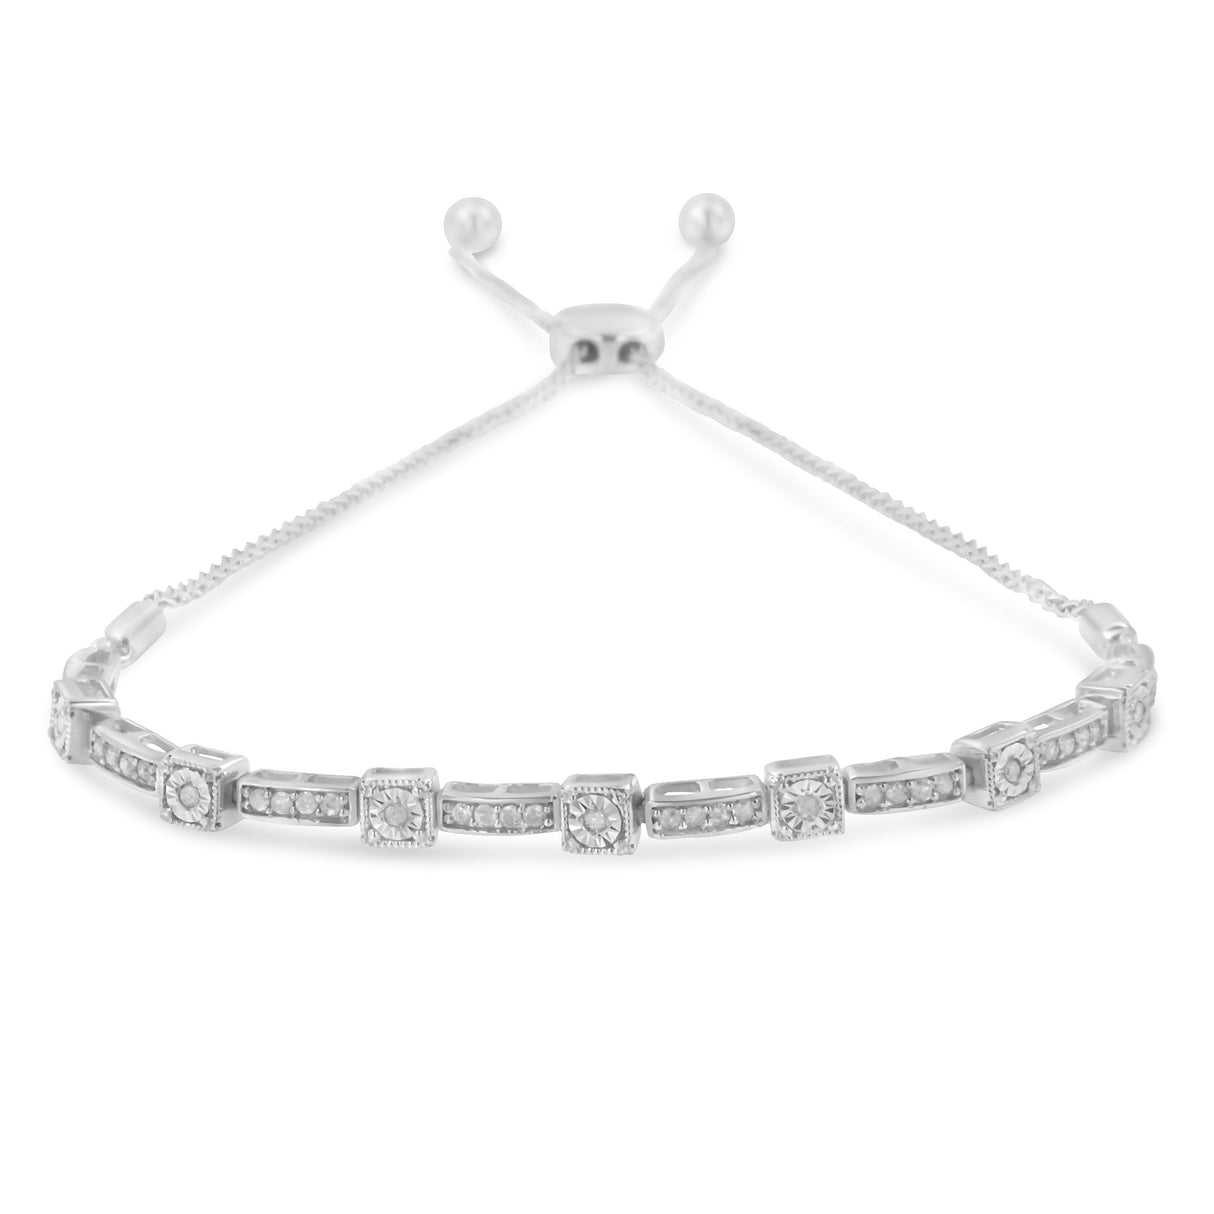 .925 Sterling Silver 1/4 Cttw Diamond 4”-10” Adjustable Bolo Alternating Square And Rectangle Bolo Bracelet (I-J Color, I3 Clarity) - Tuesday Morning-Bracelets